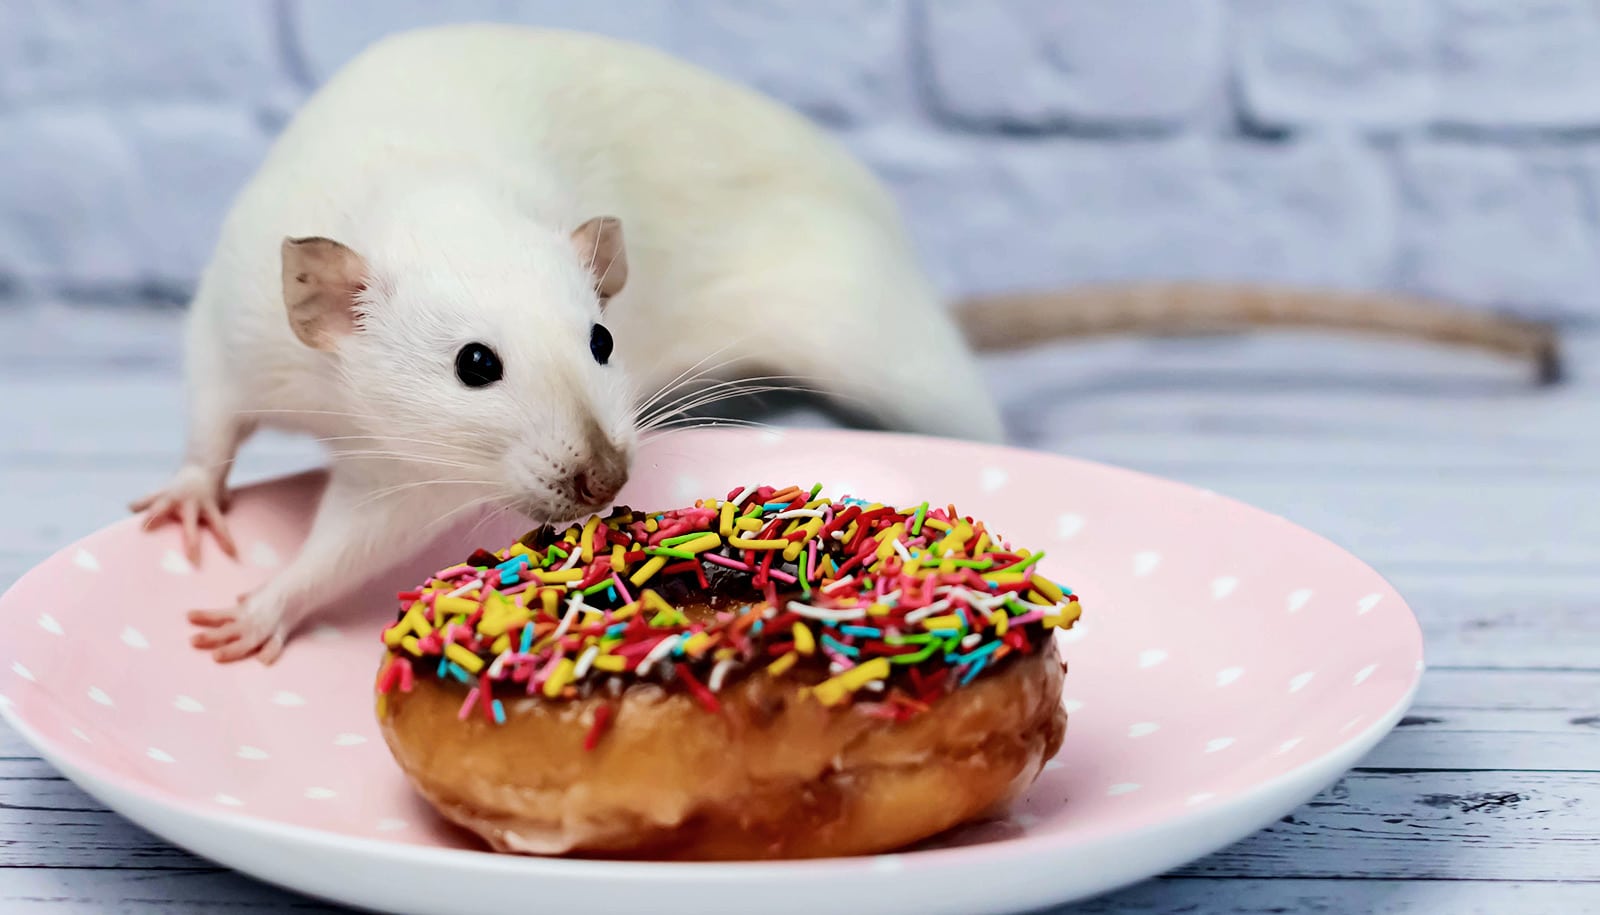 Diet high in sugar can lower rats’ ability to taste sweet